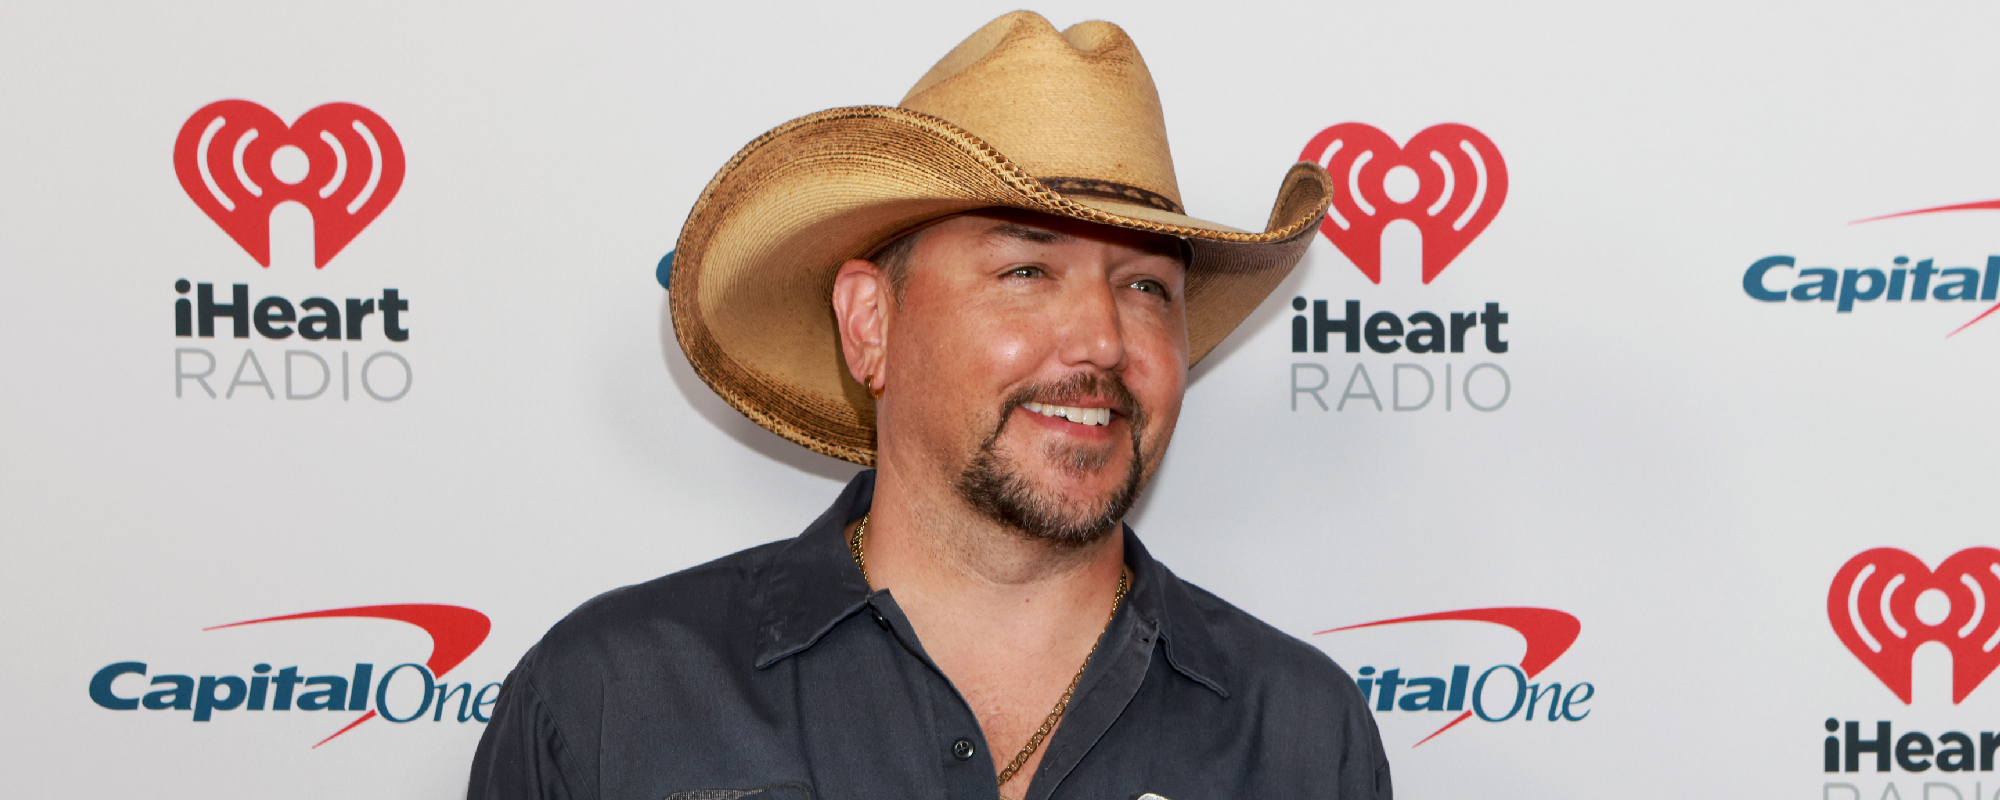 Jason Aldean Talks His “Lifer Gig” as a Country Star and Possible Retirement: “I Mean Look at Like People Like The [Rolling] Stones”